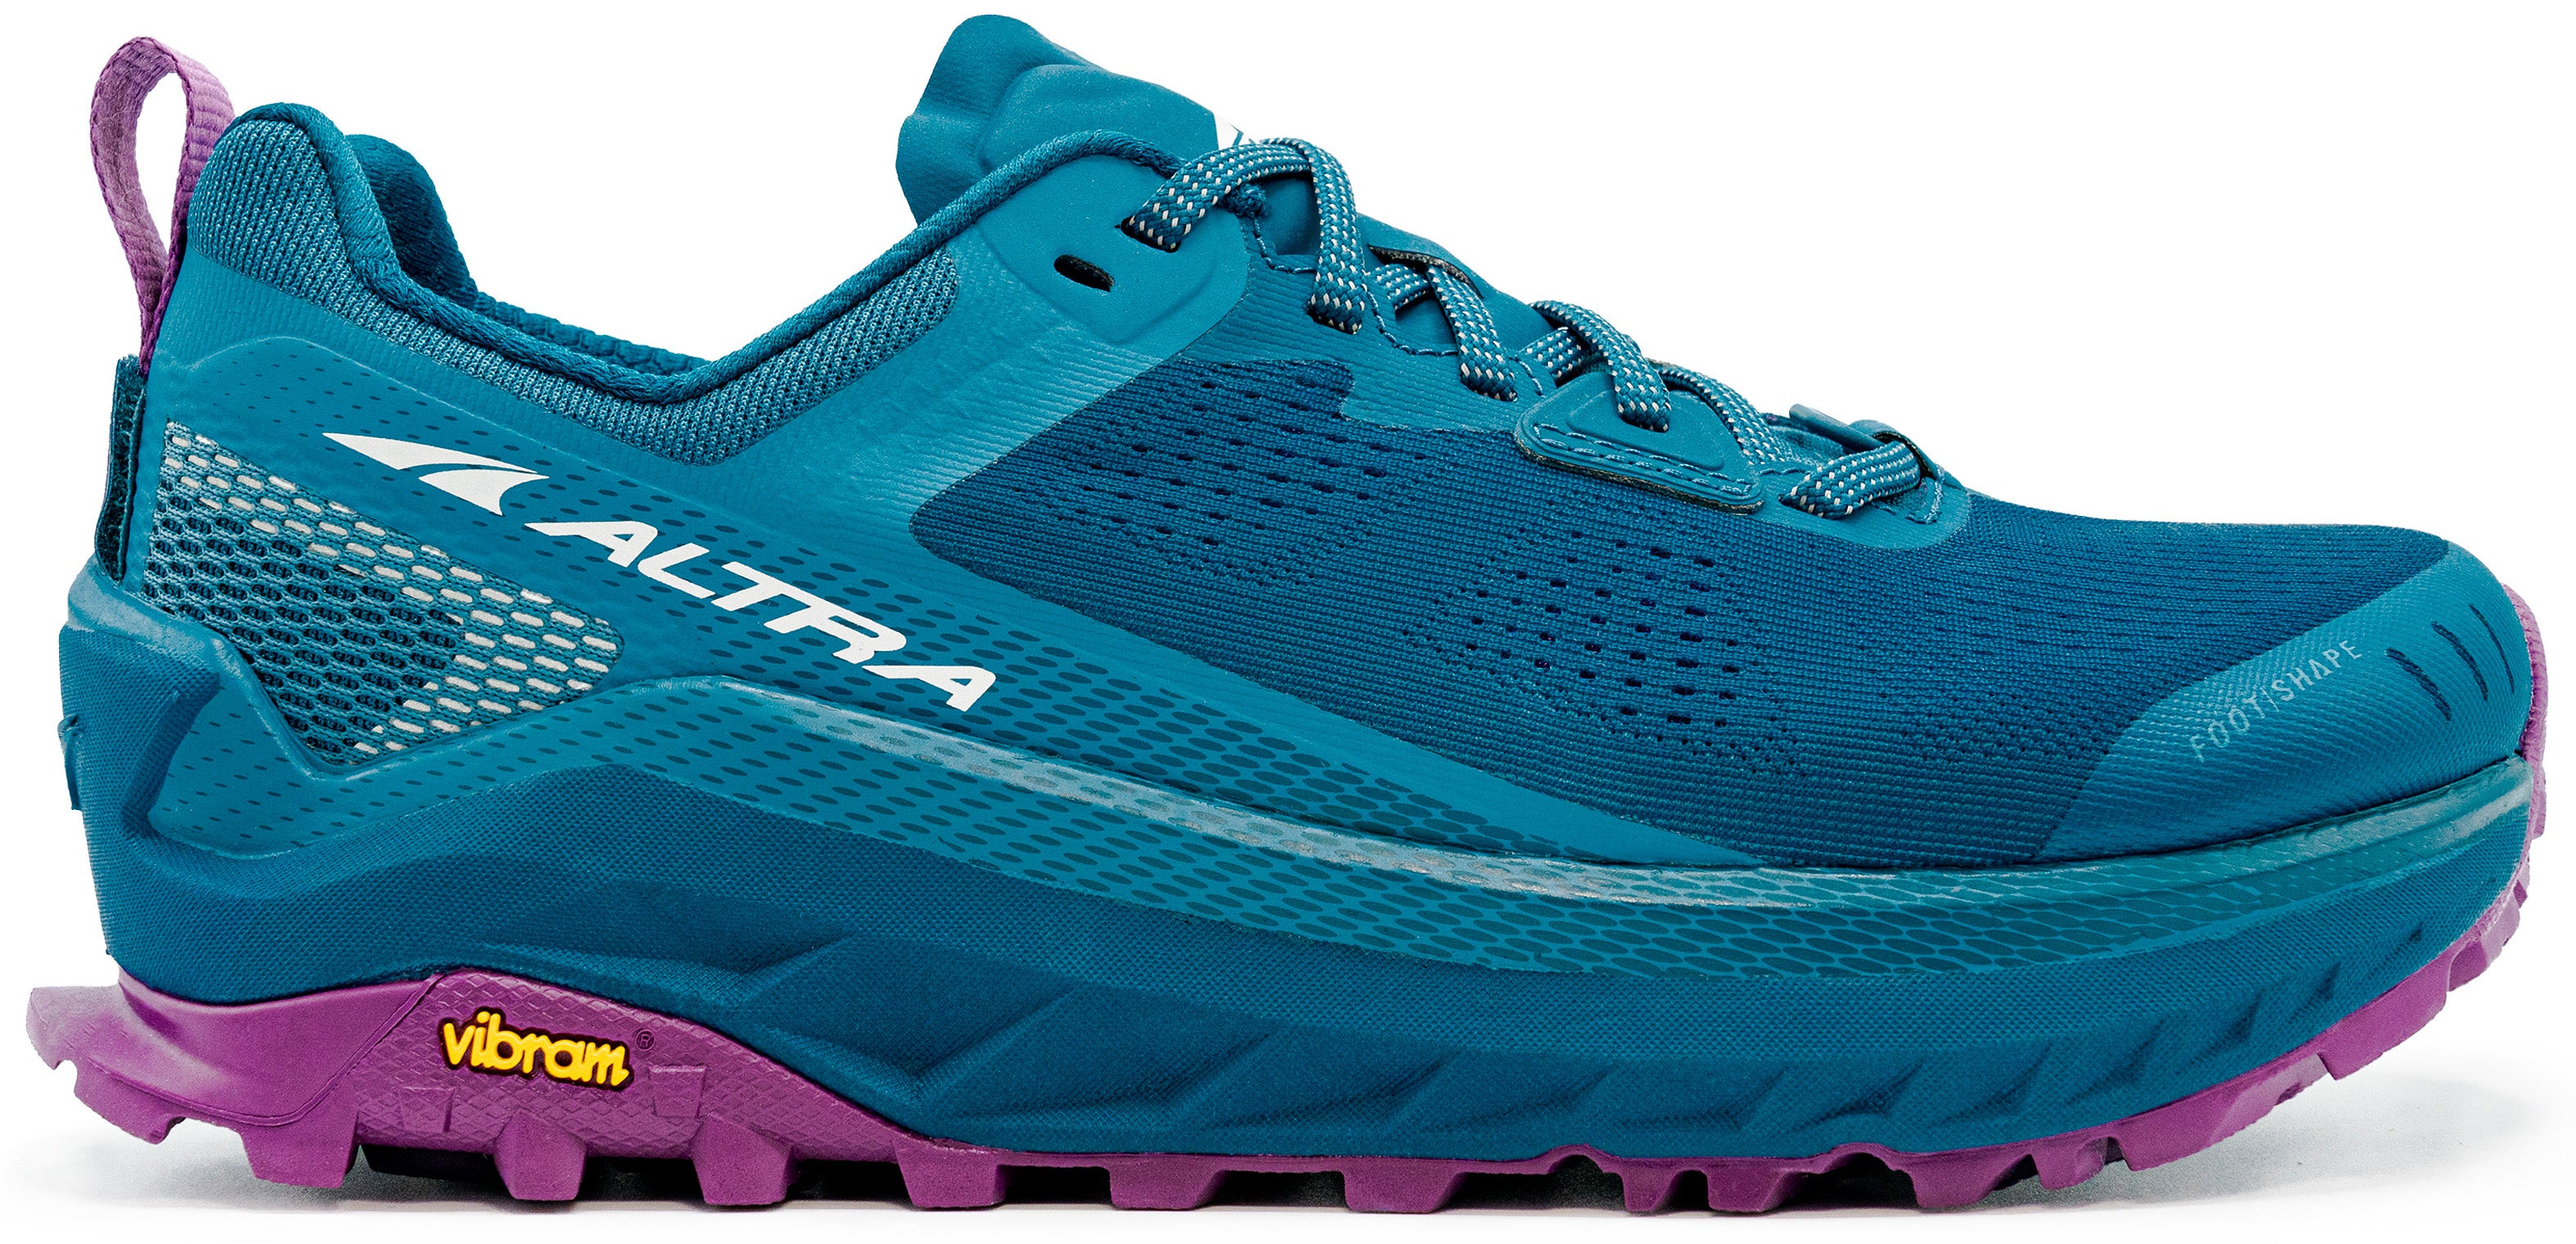 Altra Women's Olympus 4 Trail Running Shoe in Moroccan Blue from the side